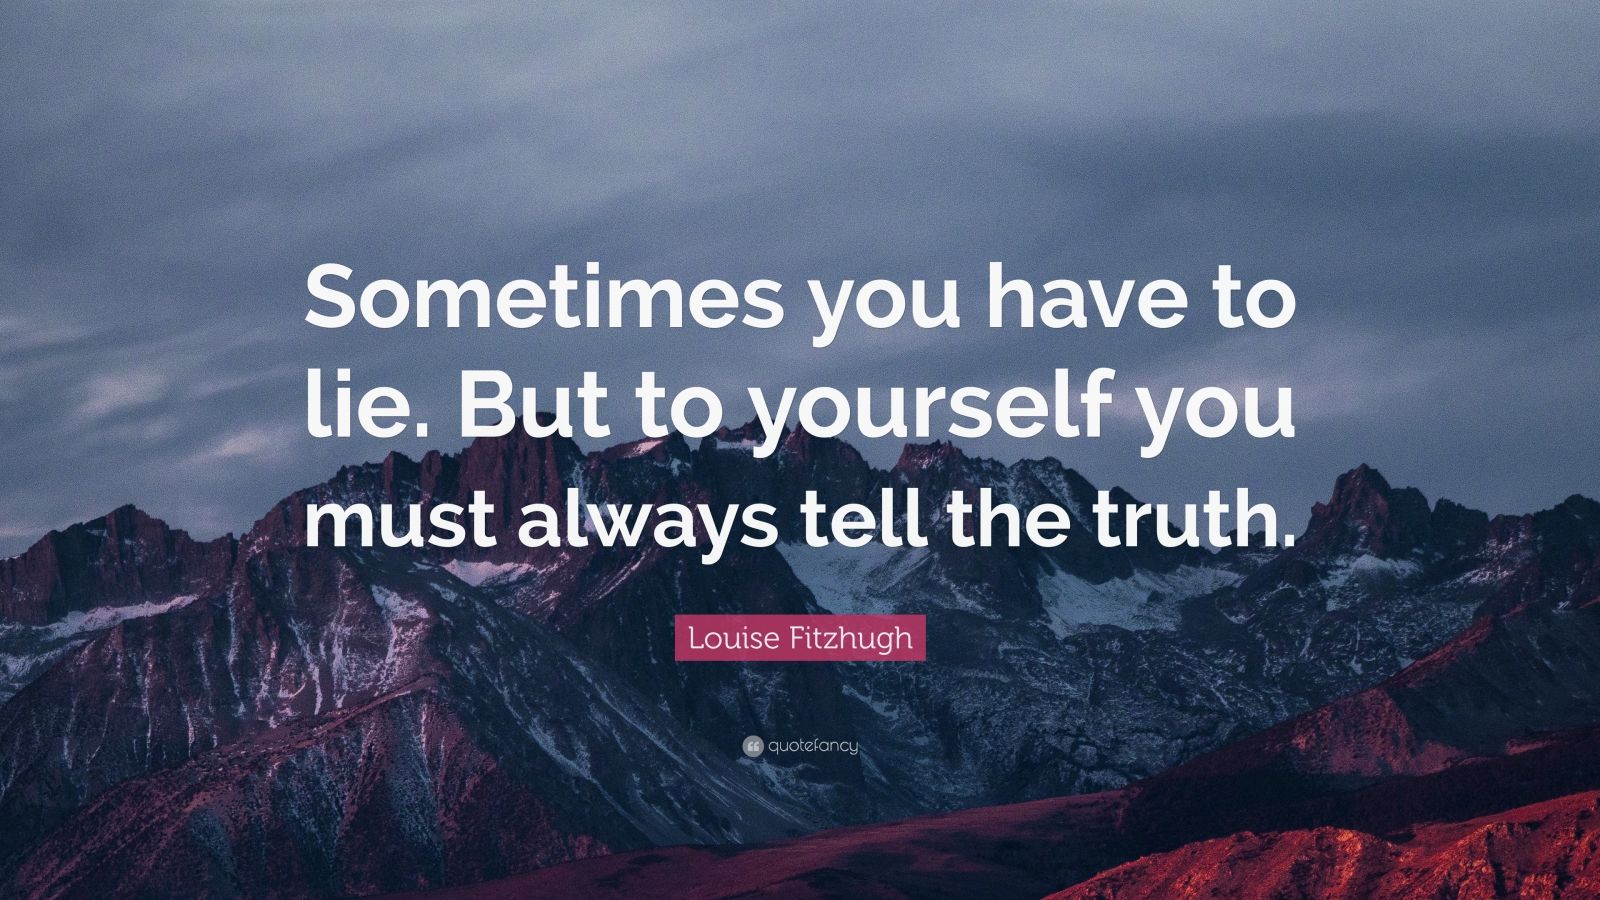 Louise Fitzhugh Quote: “Sometimes you have to lie. But to yourself you ...